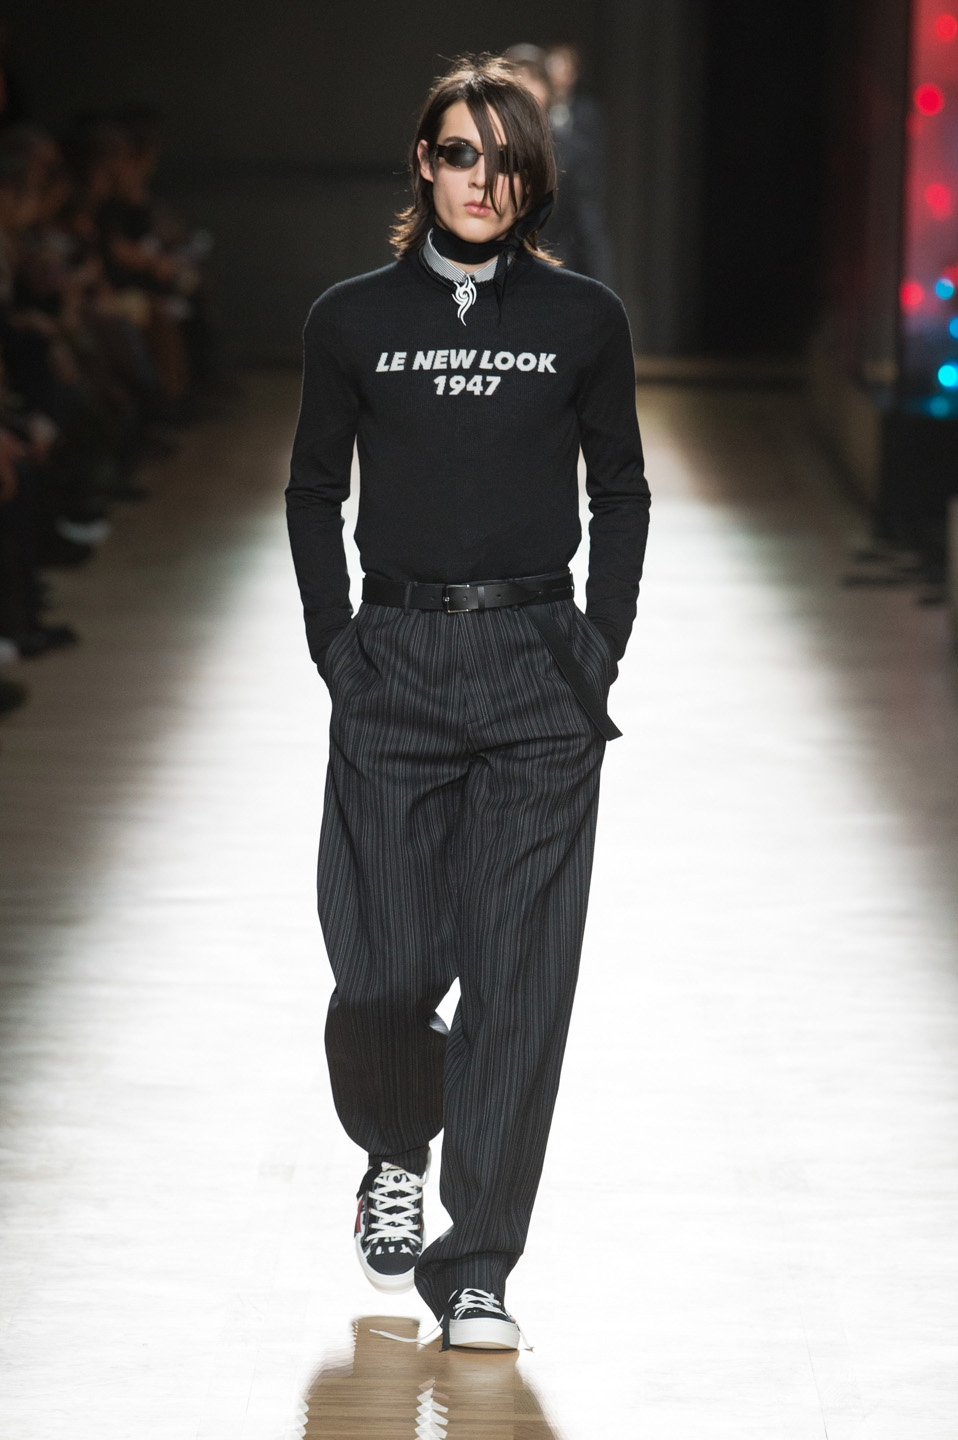 DIOR HOMME WINTER 18 19 BY PATRICE STABLE look46 Fall/WInter 2018 runway